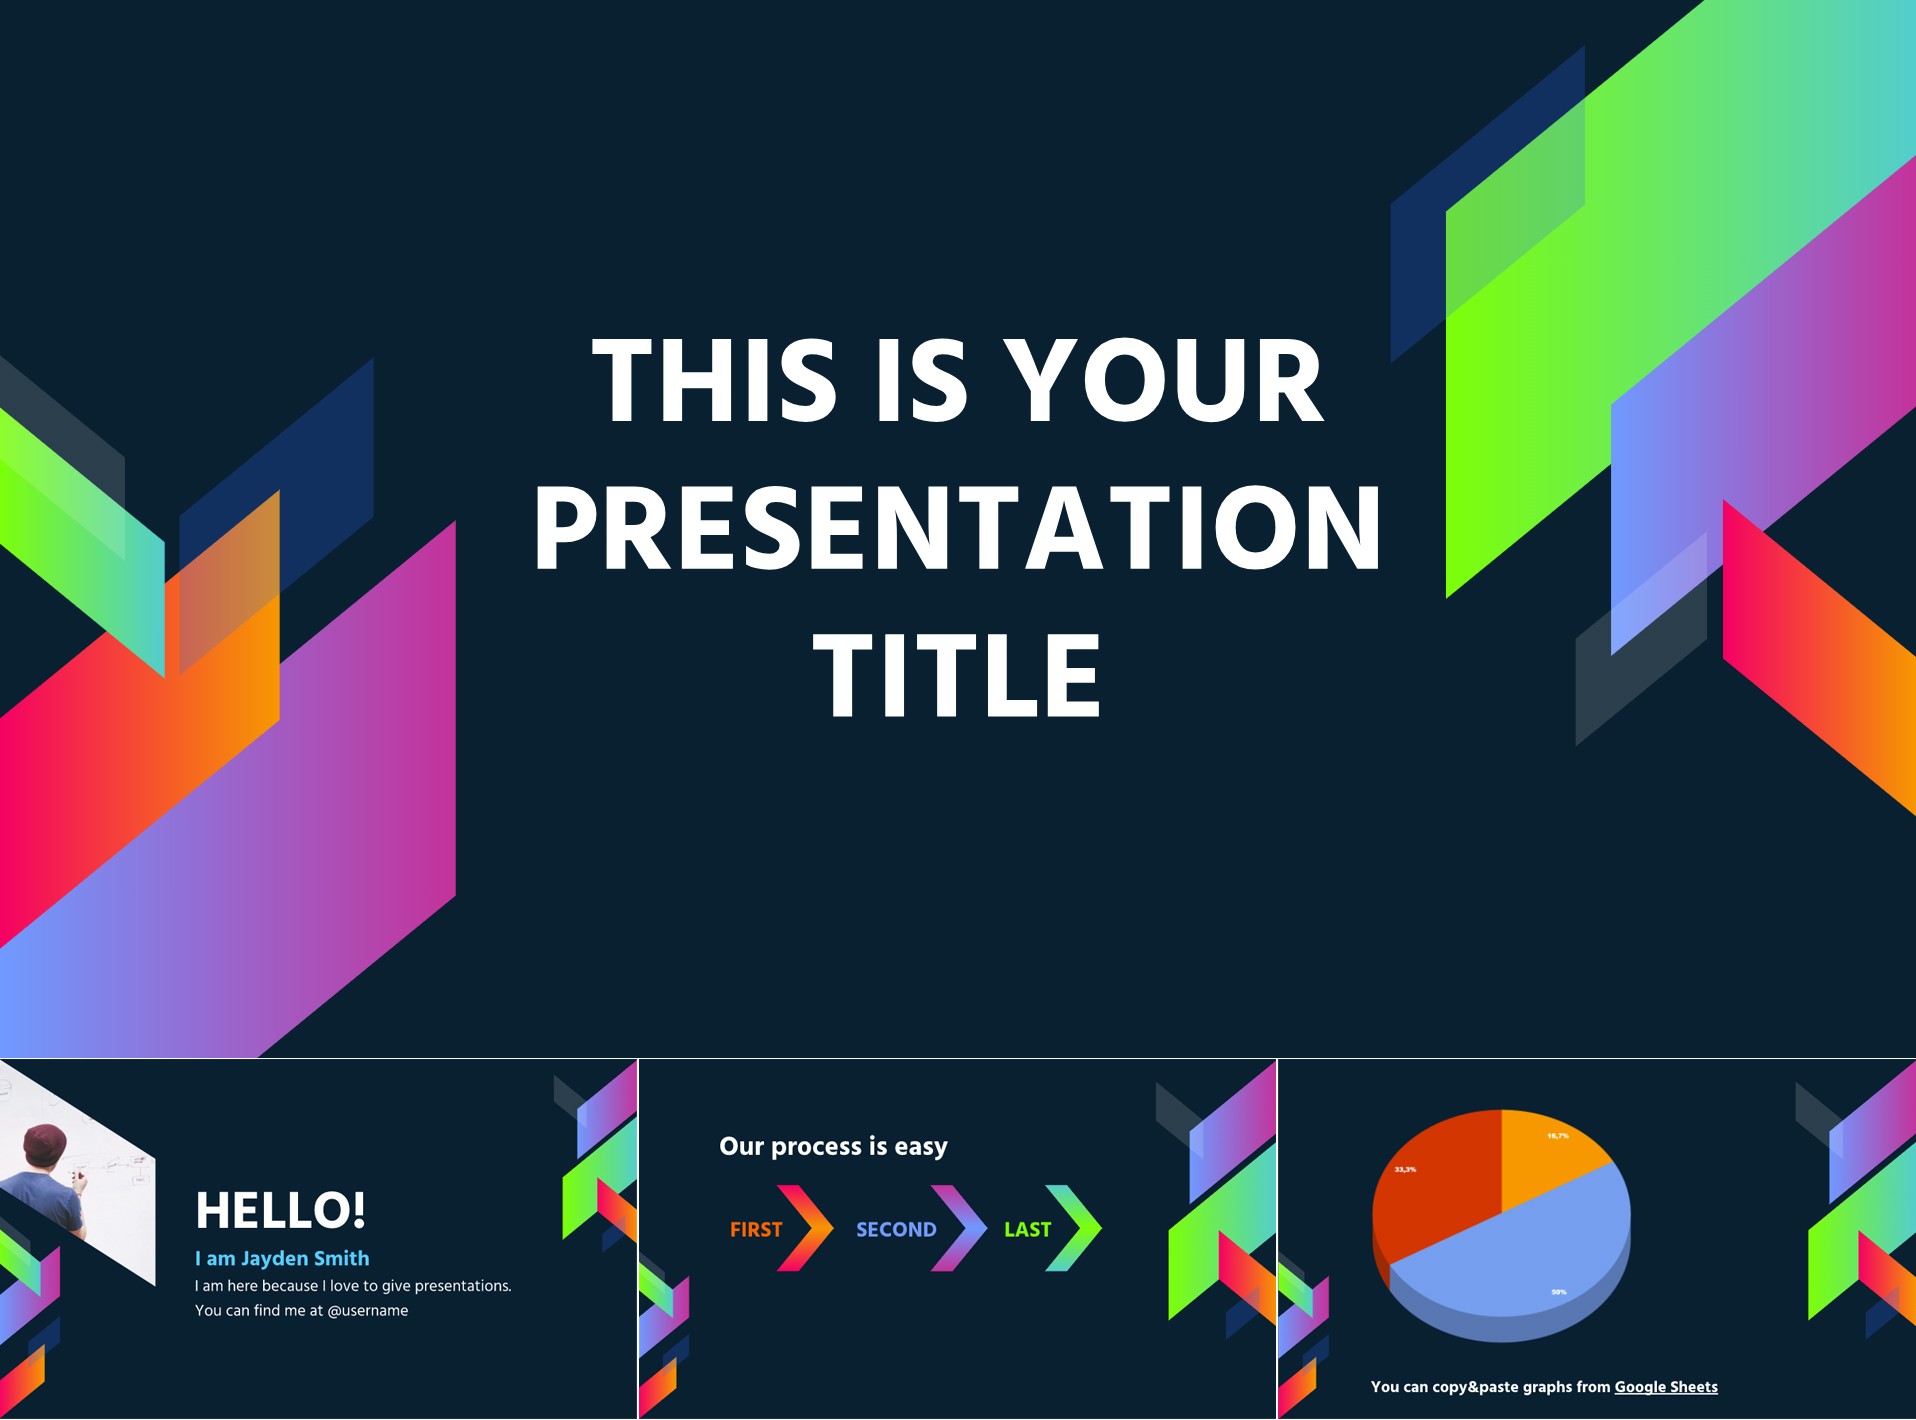 30 Free Google Slides Templates For Your Next Presentation Themes